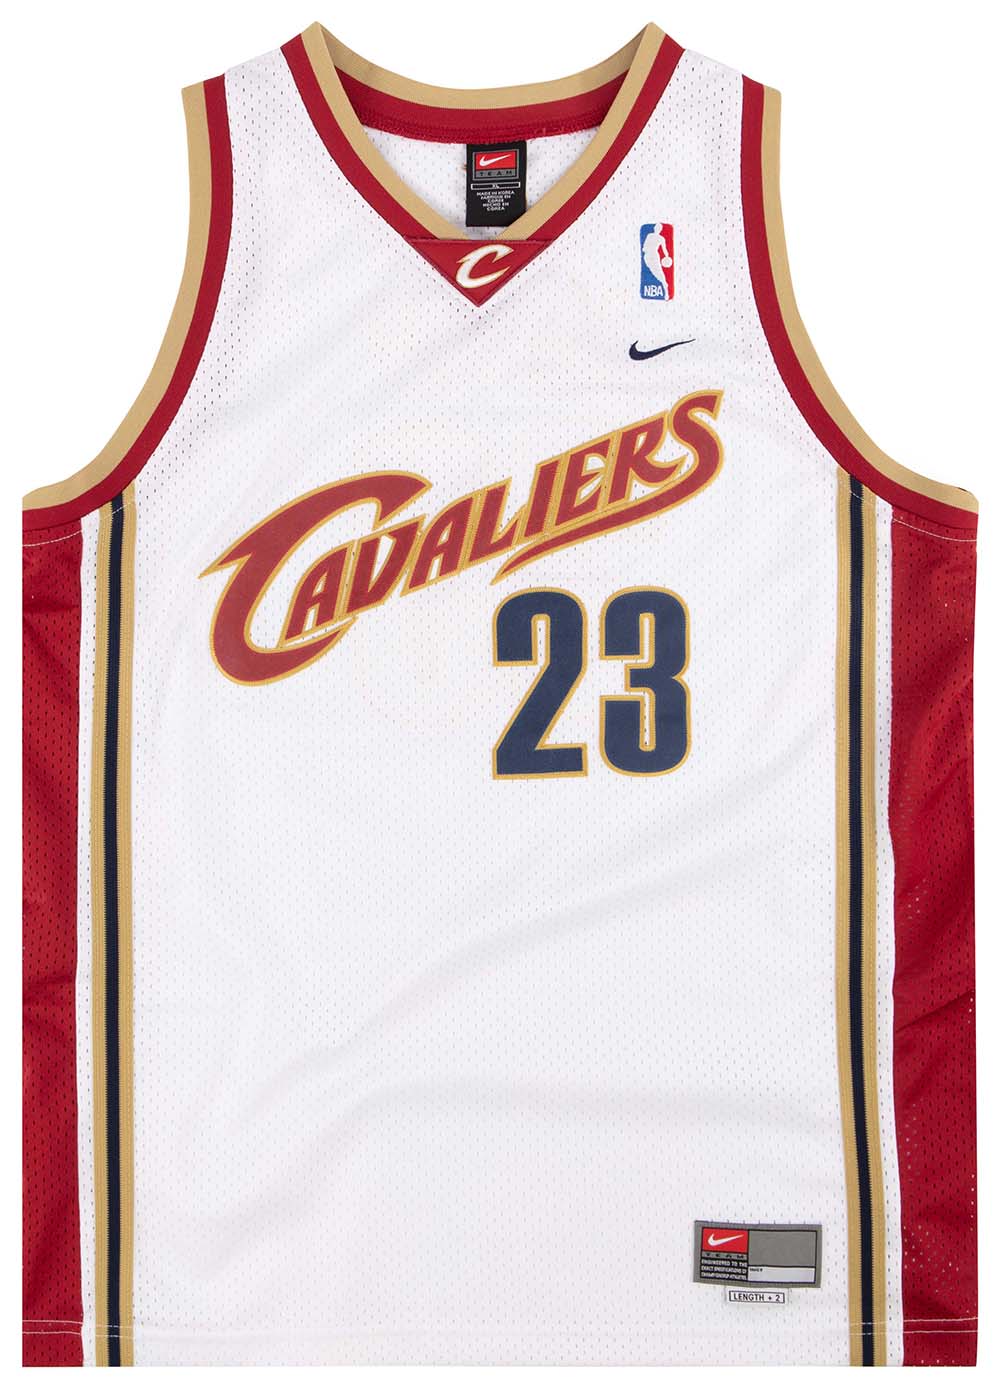 Youth Cleveland Cavaliers #23 LeBron James Home Jersey